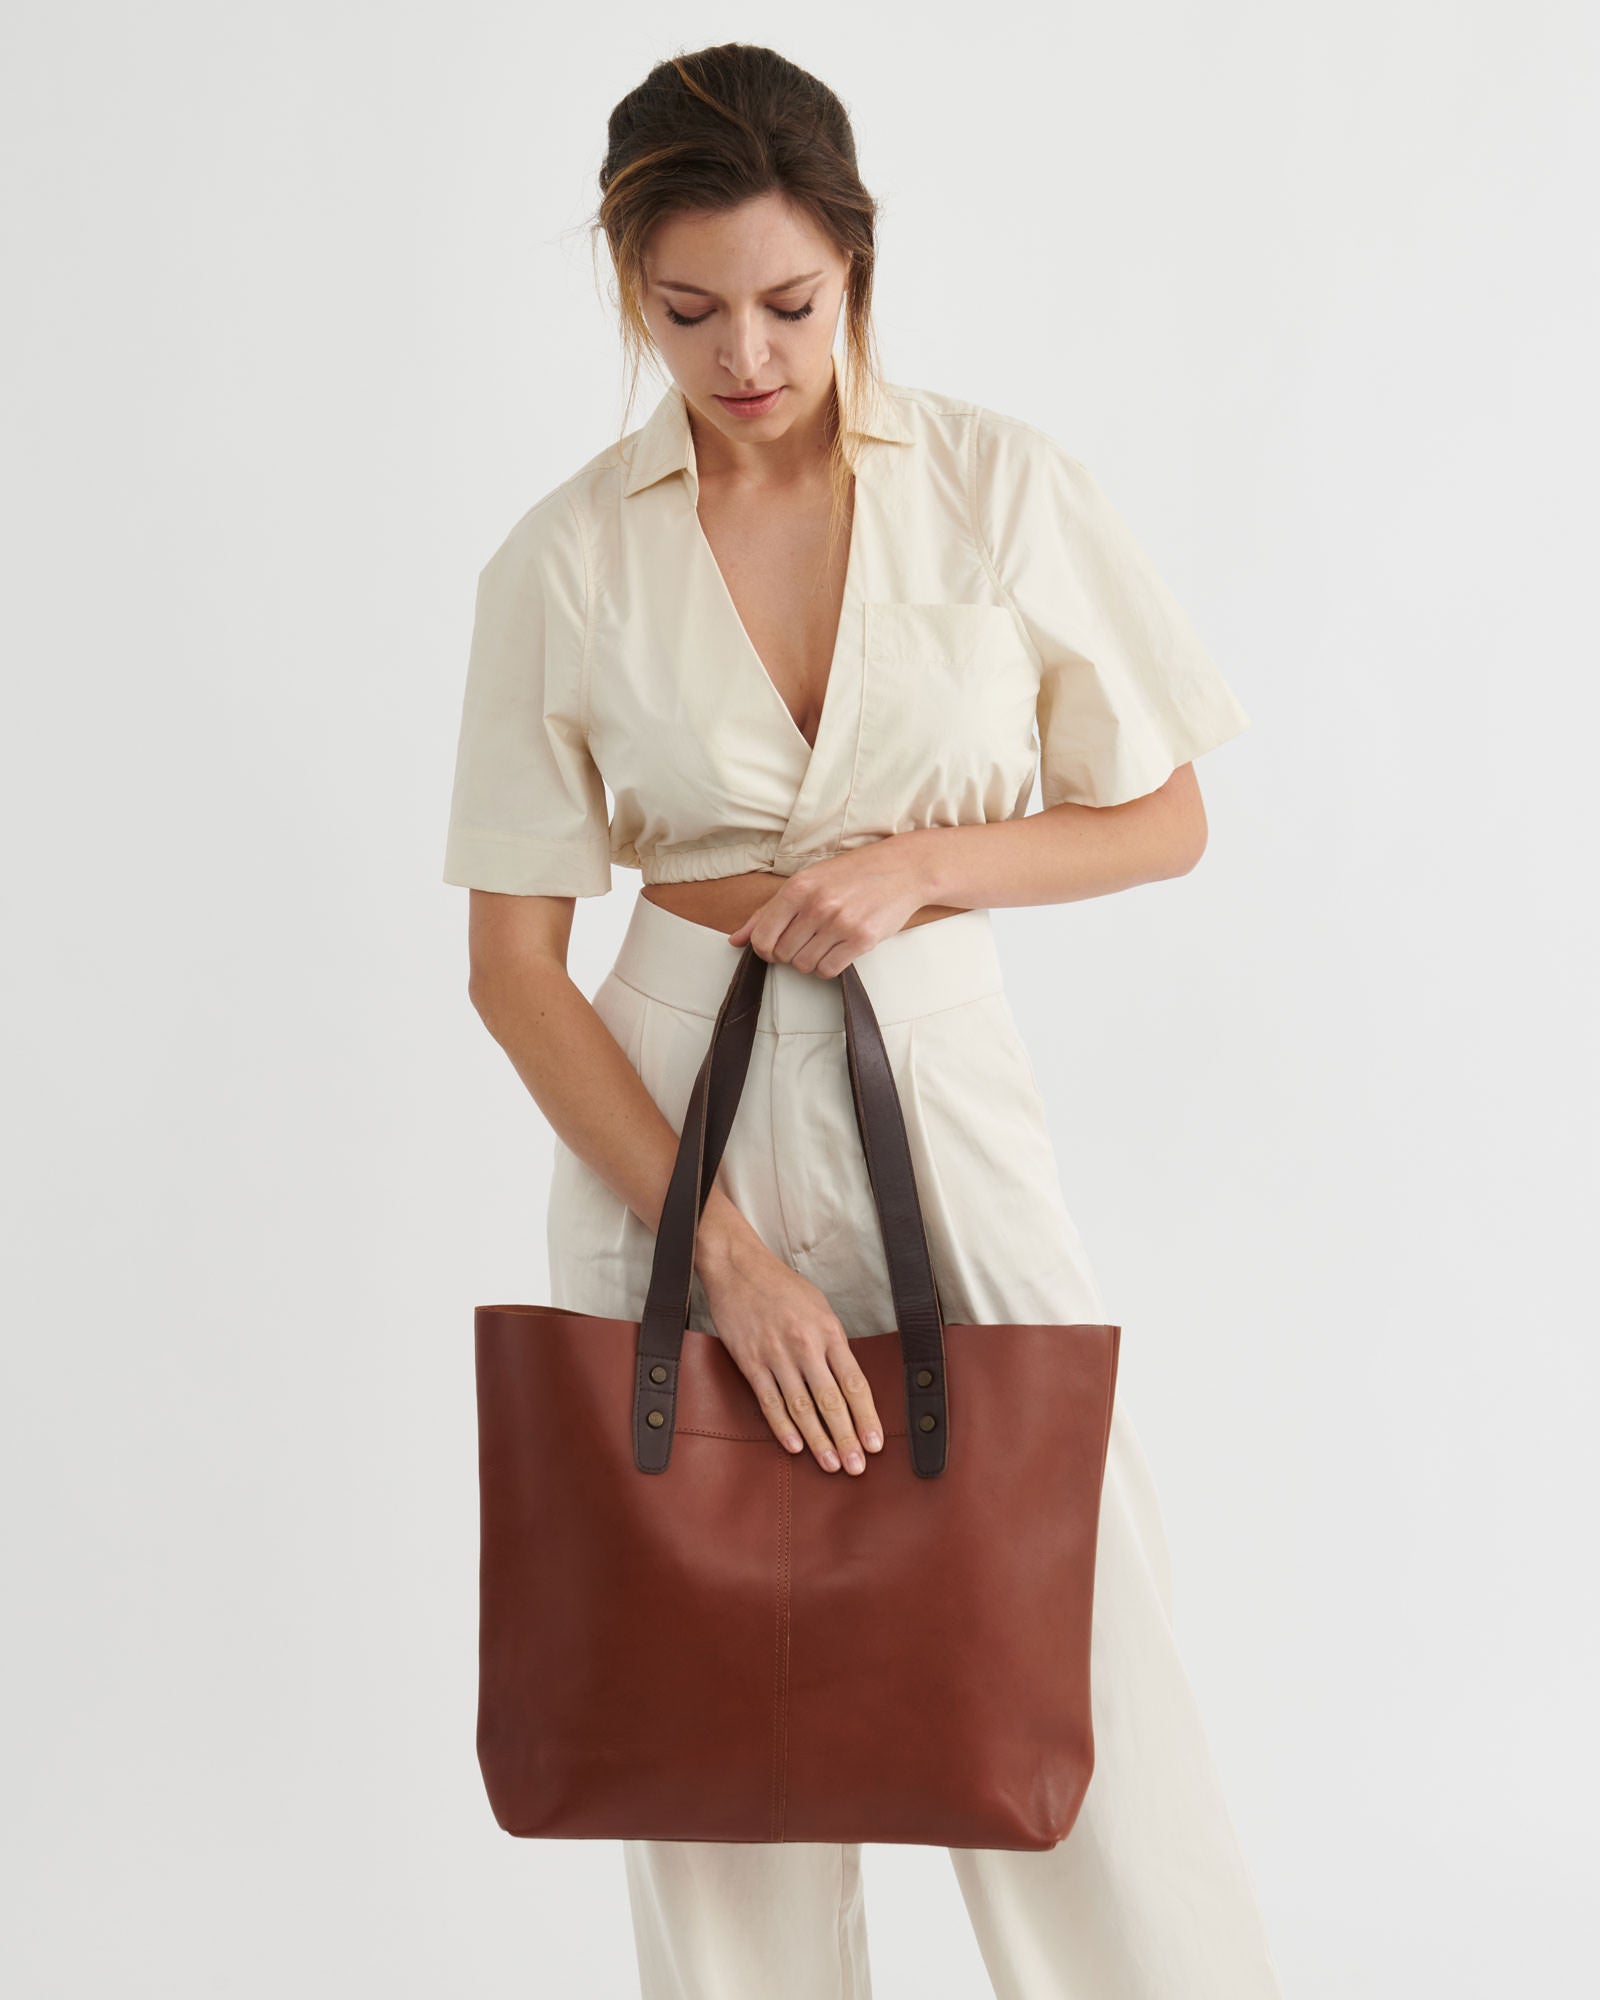 Must-Have Bags in Every Woman's Collection - Skinnedcartree